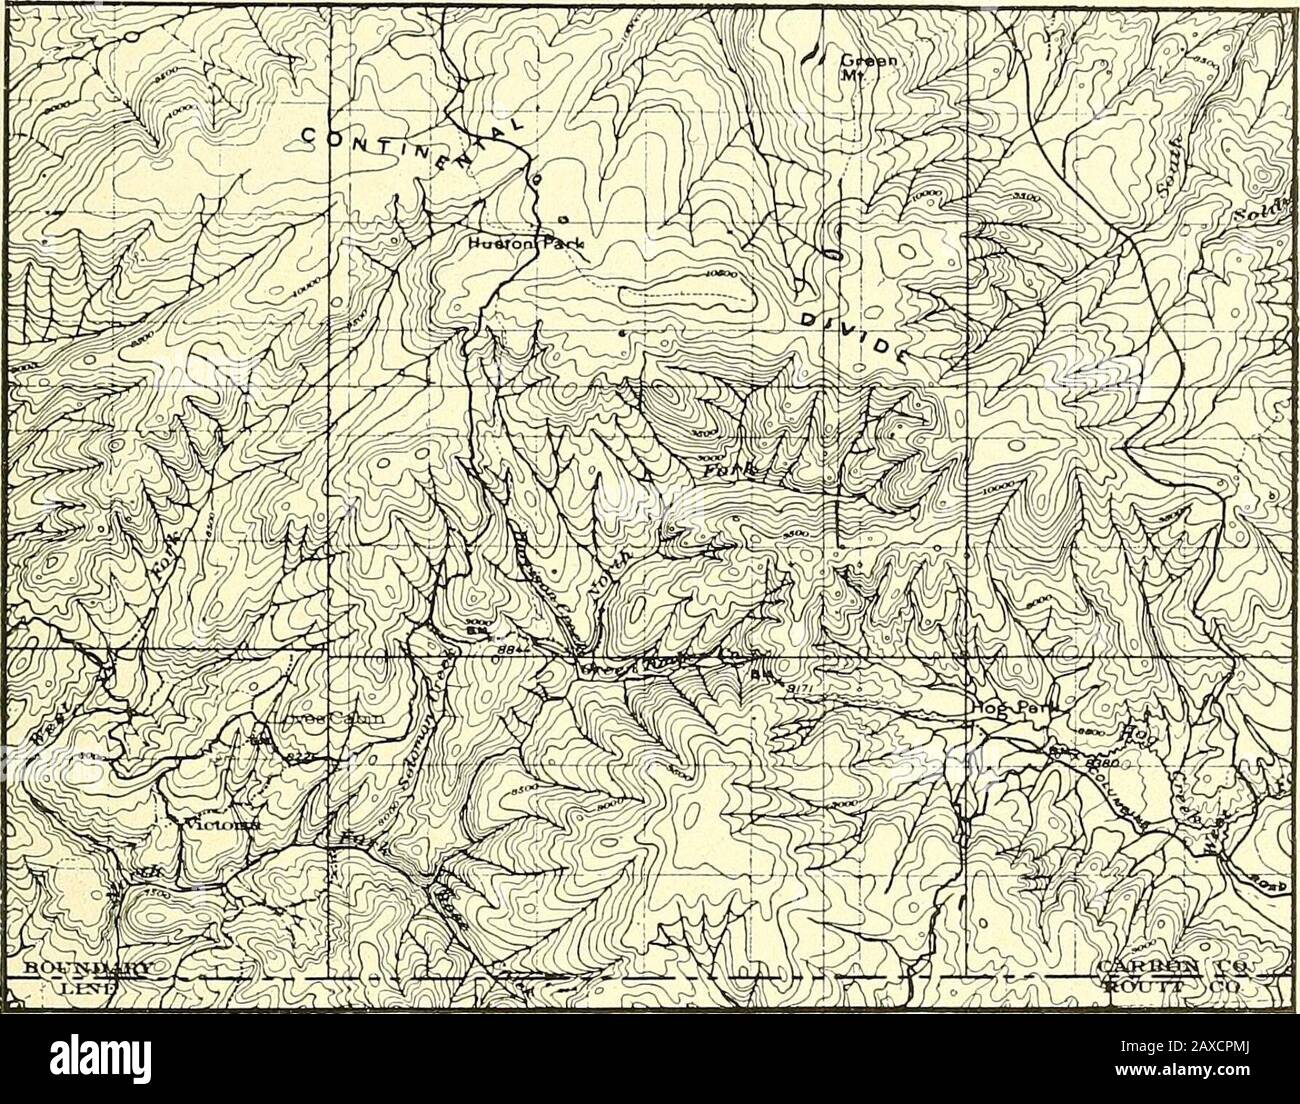 Forest physiography; physiography of the United States and principles of soils in relation to forestry . her than rugged, and wagon 1 A. C. Veatch, Geography and Geology of a Portion of Southwestern Wyoming, Prof. PaperU. S. Geol. Surv. No. 56, 1907, pp. 34-35, and Plate i. - J. L. Rich, The Physiography of the Bishop Conglomerate, Southwestern Wyoming,Jour. Geol., vol. 18, 1910, pp. 601-632. 3 S. F. Emmons, U. S. Geol. Expl. of the 40th Par. (King Surveys), vol. 2, 1877, p. 236. ROCKY MOUNTAINS. II 343 roads have been constructed on almost every portion of the area with-out that excessive exp Stock Photo